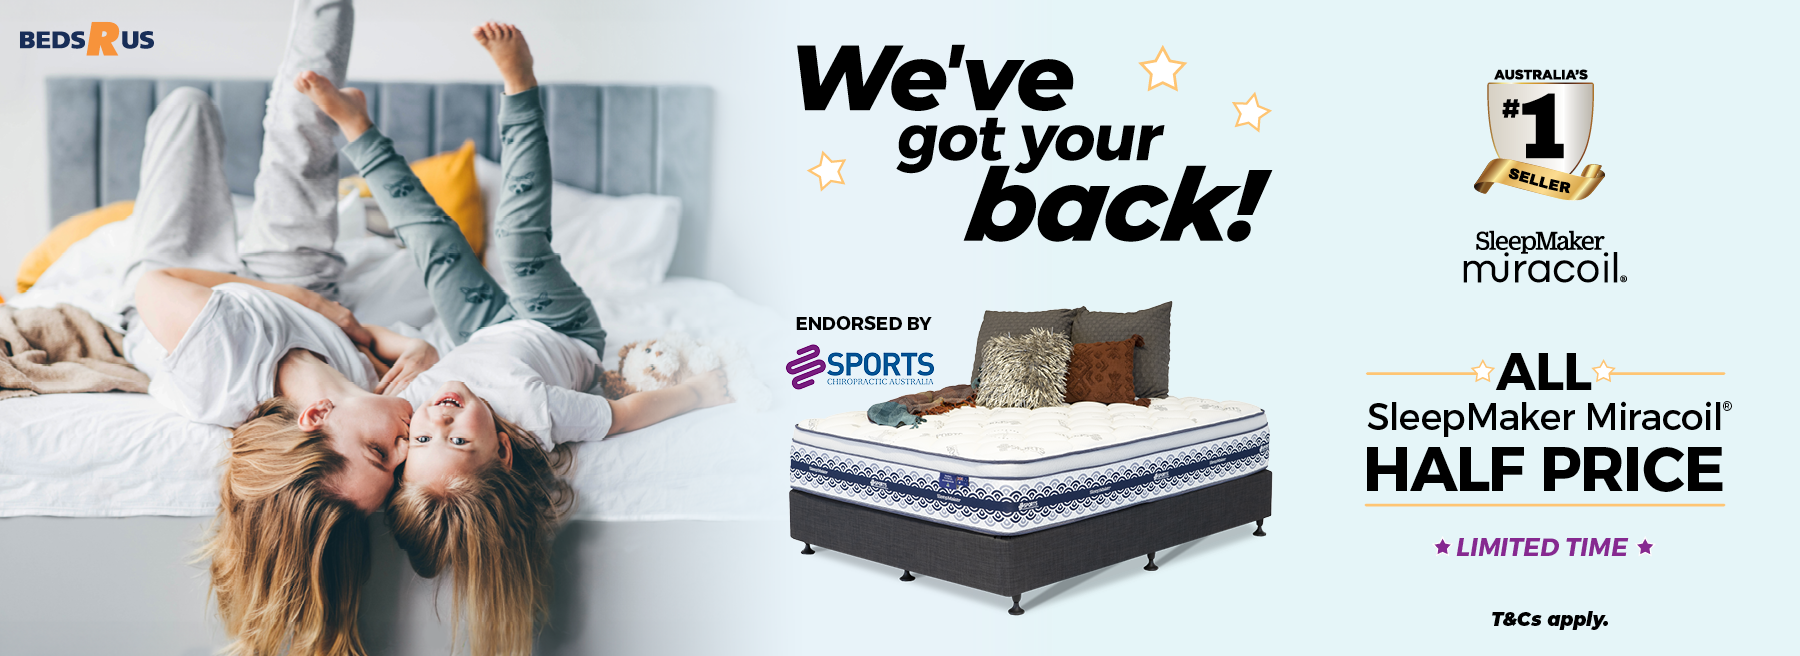 Miracoil Mattresses 50% Off Sale